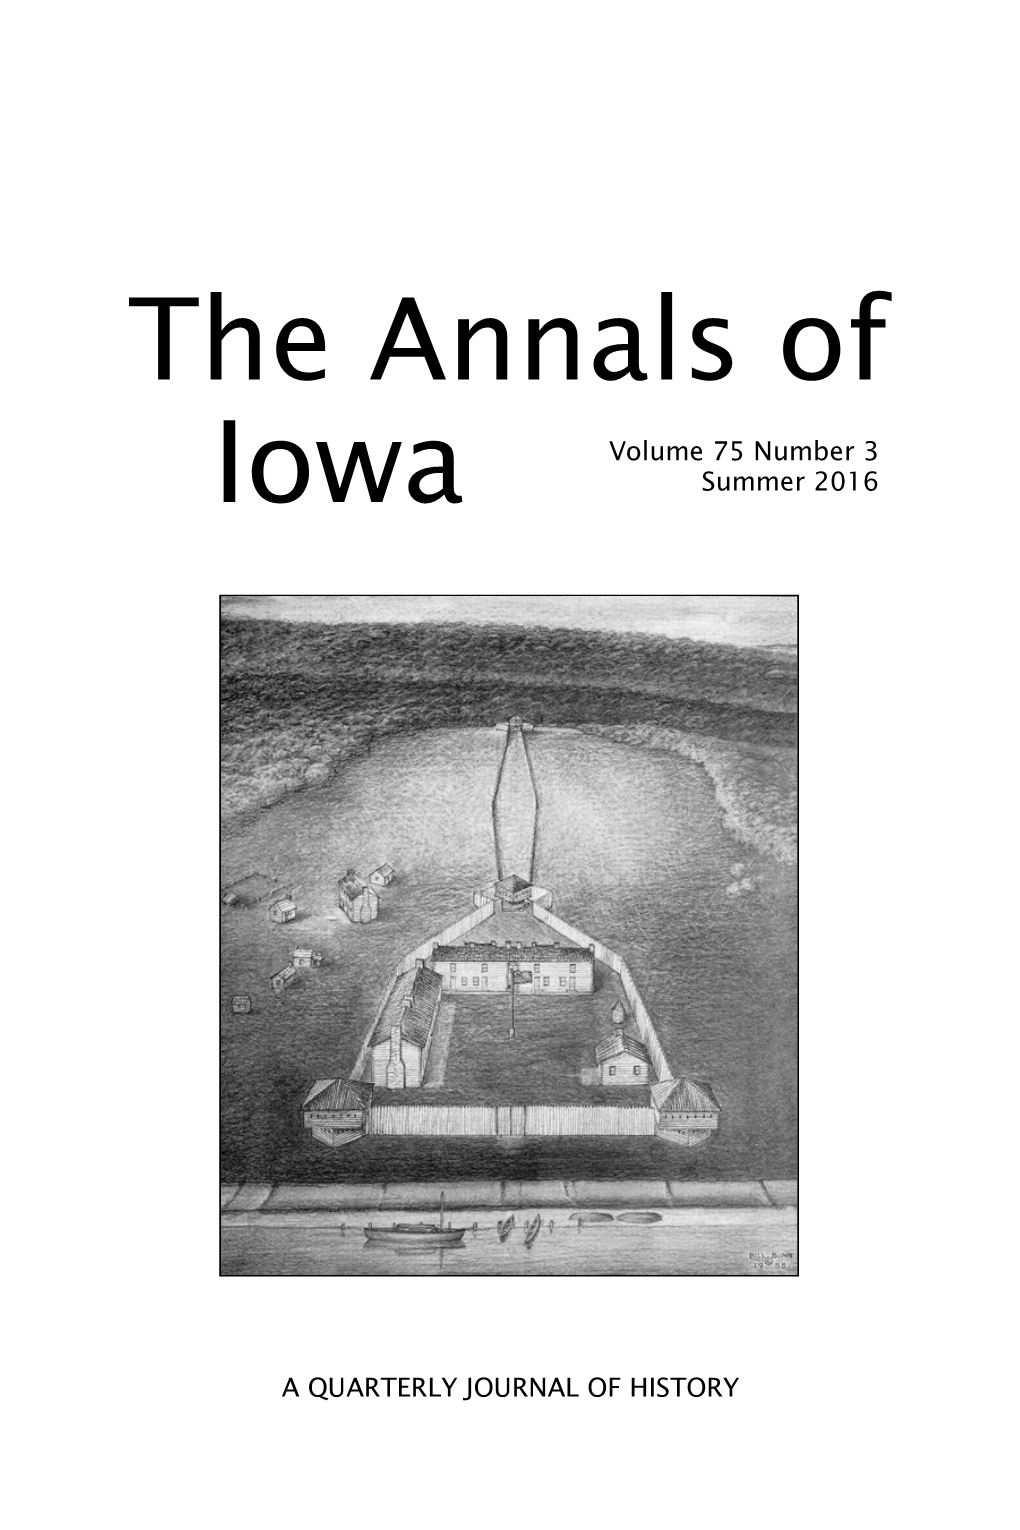 The Annals of Iowa and the Anonymous Reviewers Who Read This Article Provided Invaluable Suggestions That Have Made This Essay a Stronger Piece of Scholarship